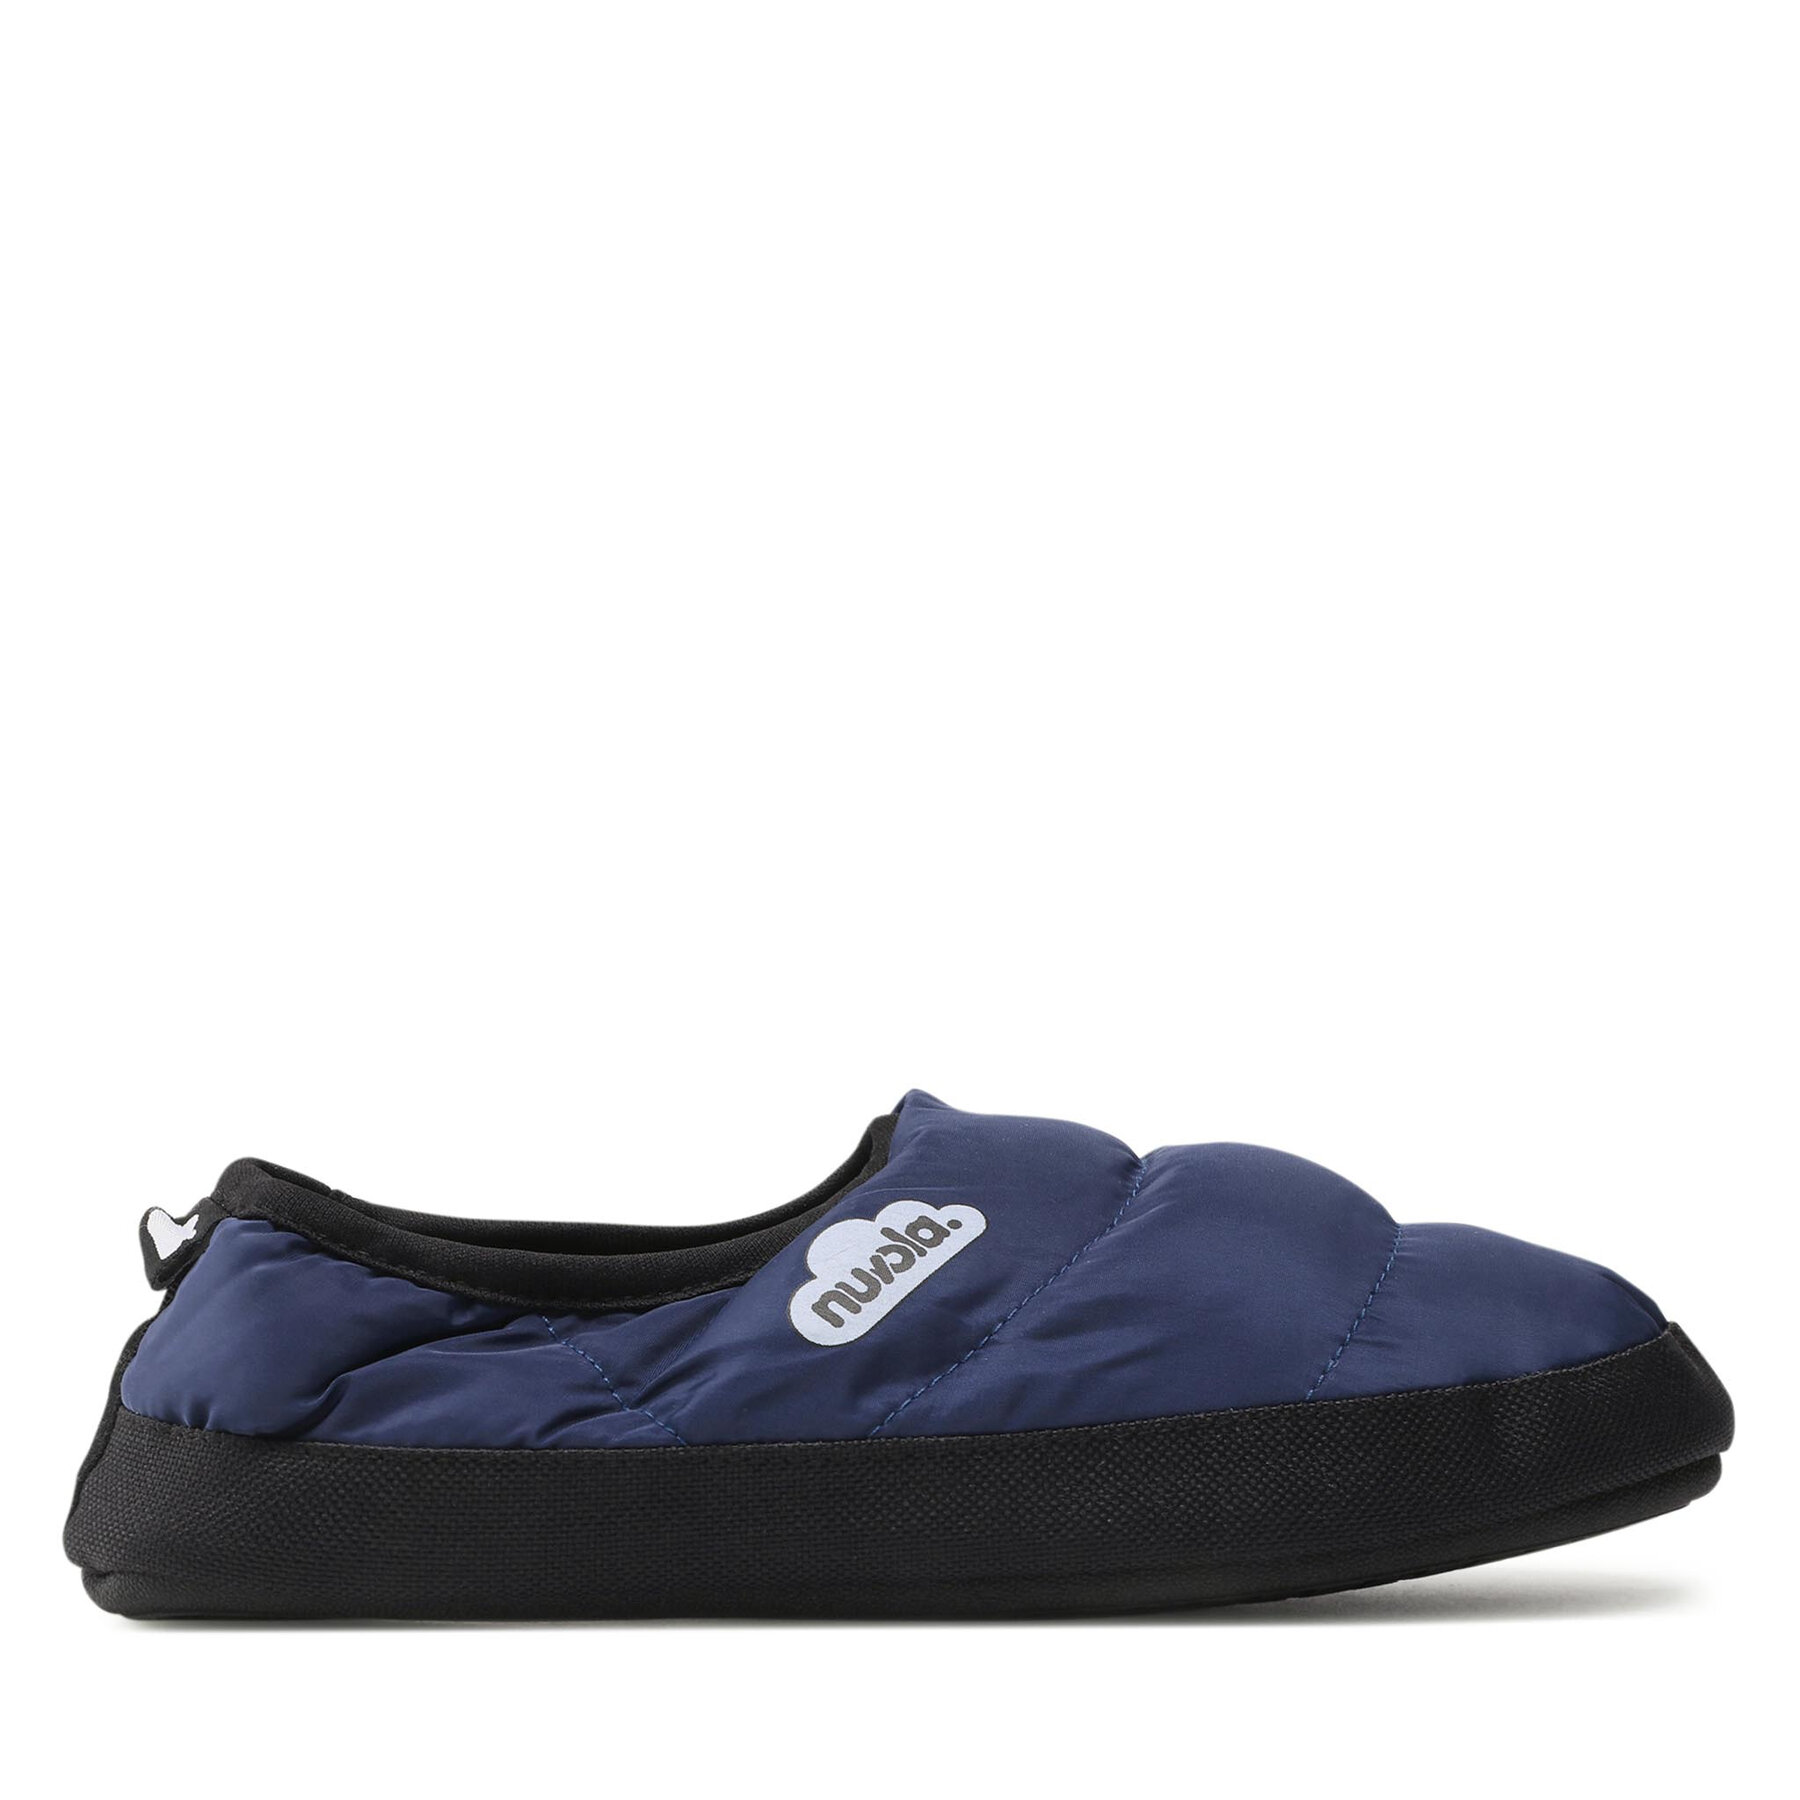 nuvola UNCLAG Slippers navy